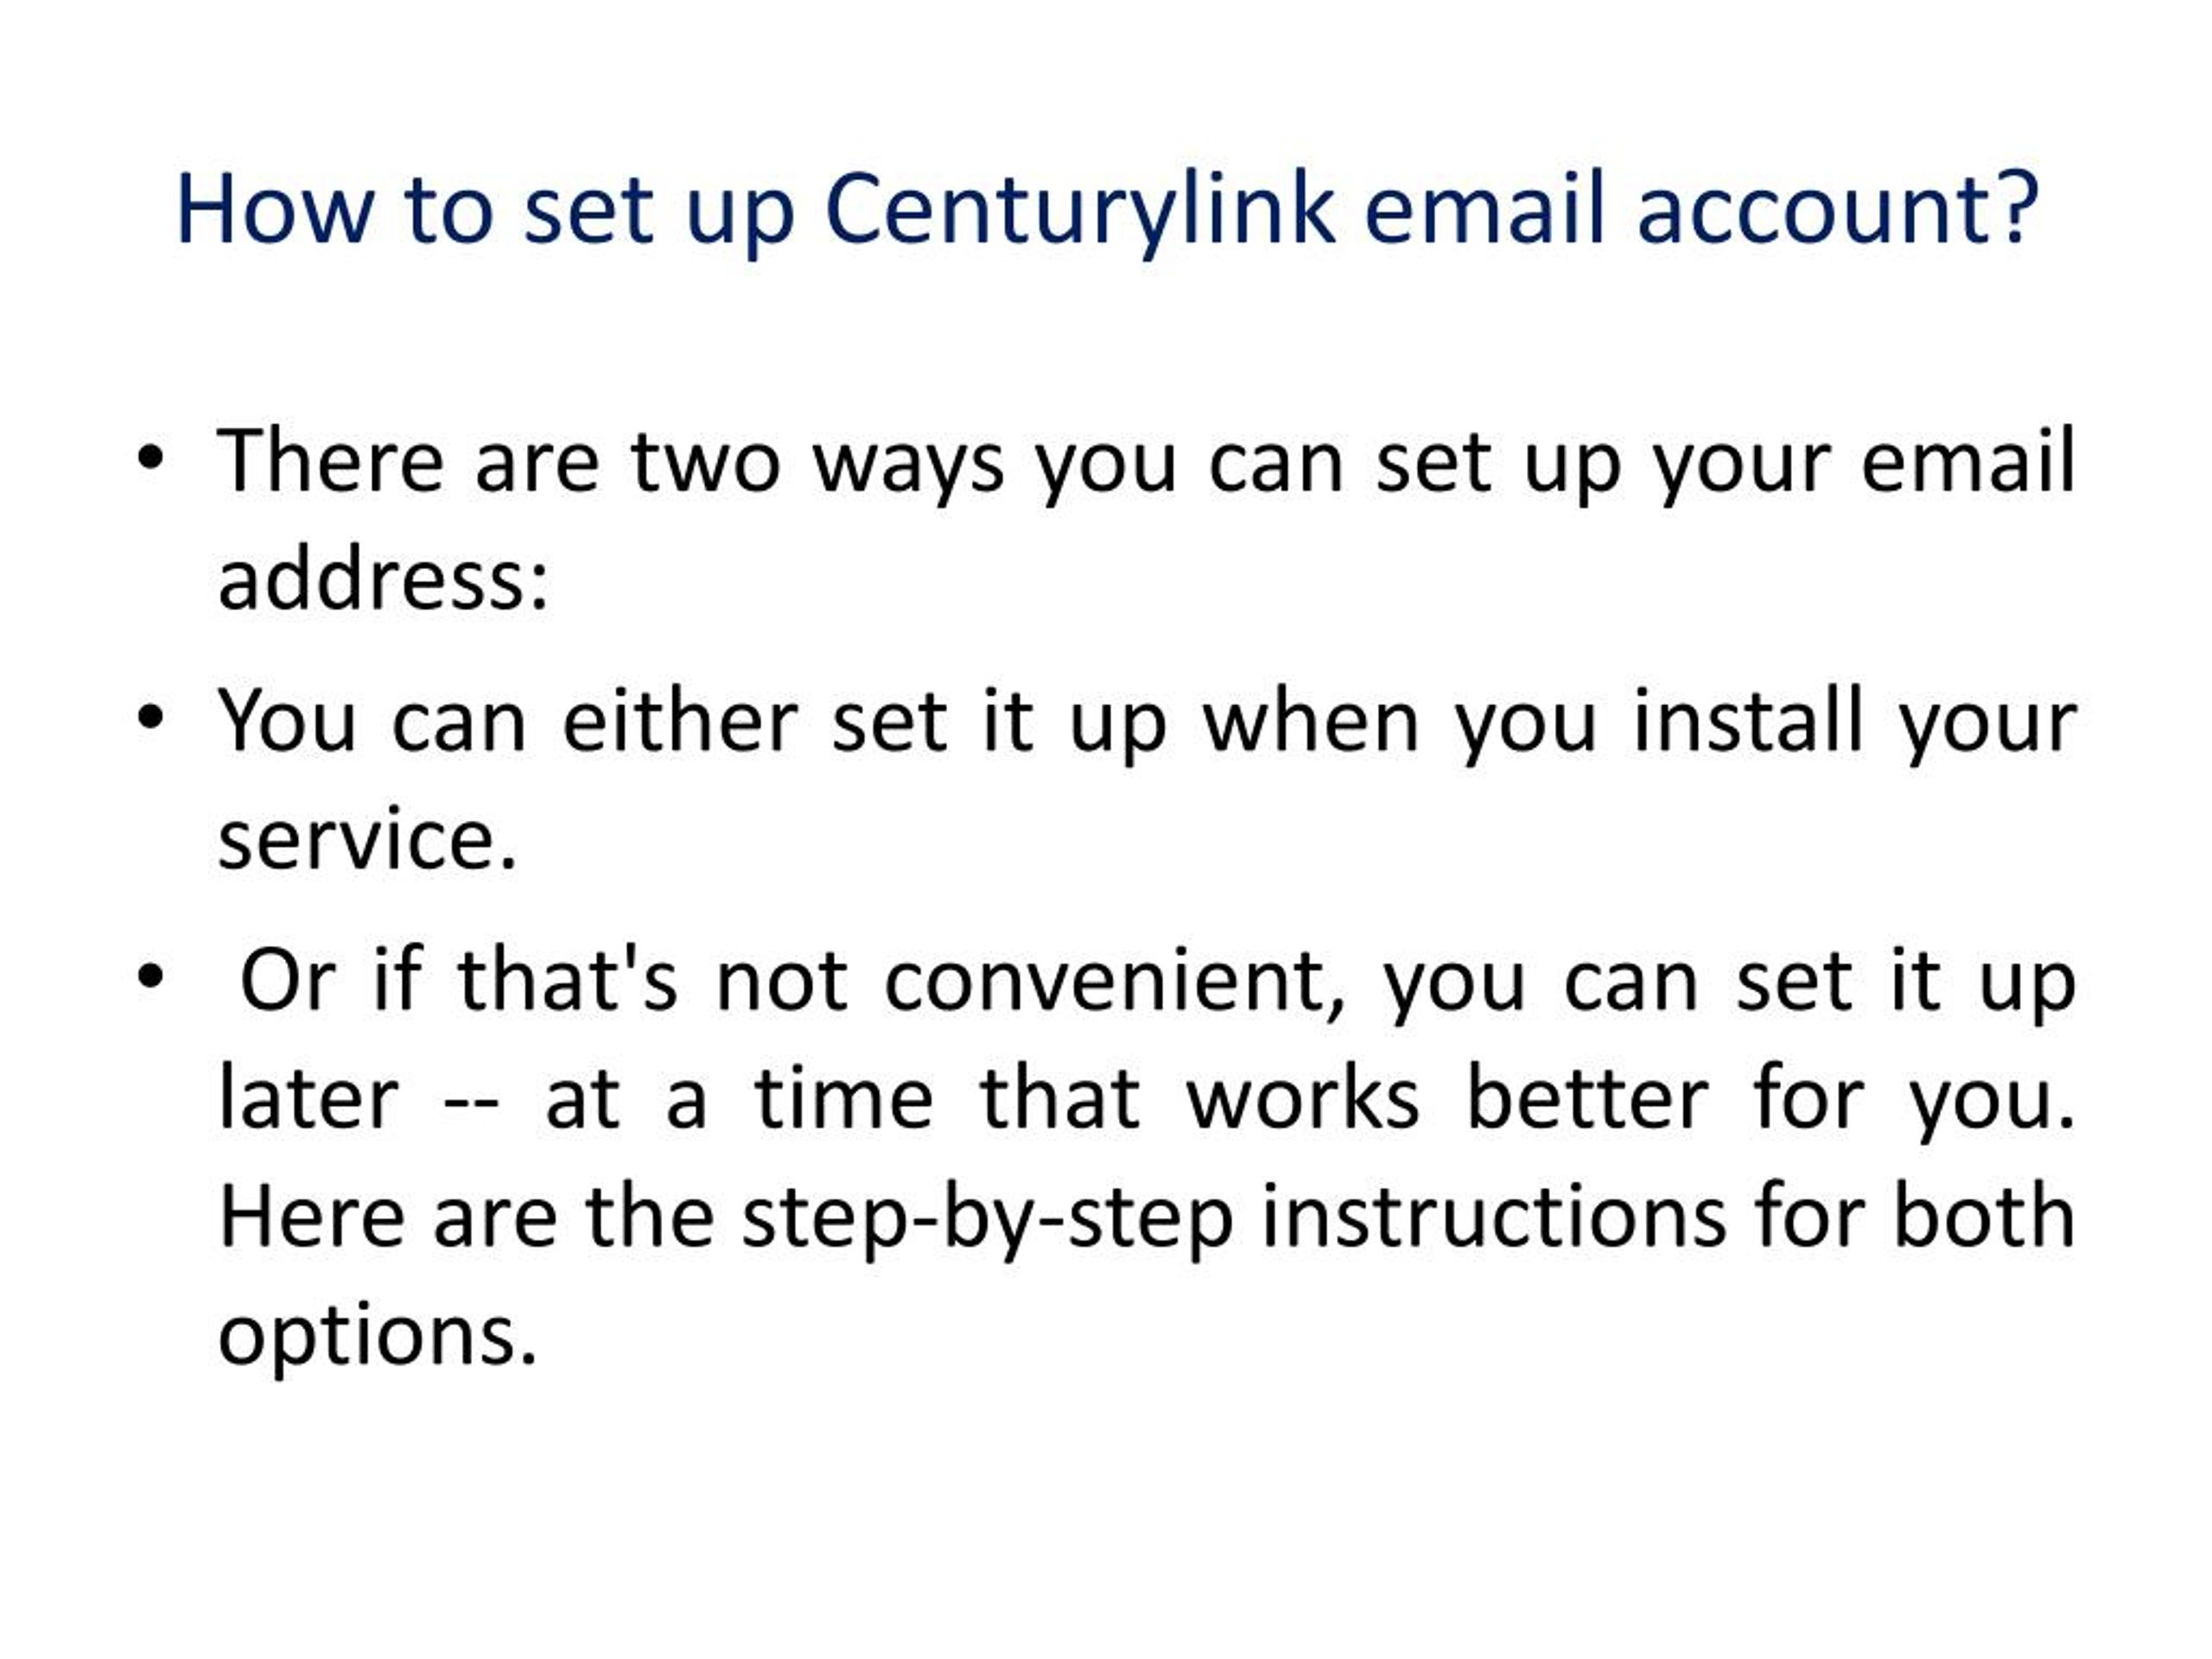 Ppt How To Set Up Centurylink Email Account For Android Powerpoint